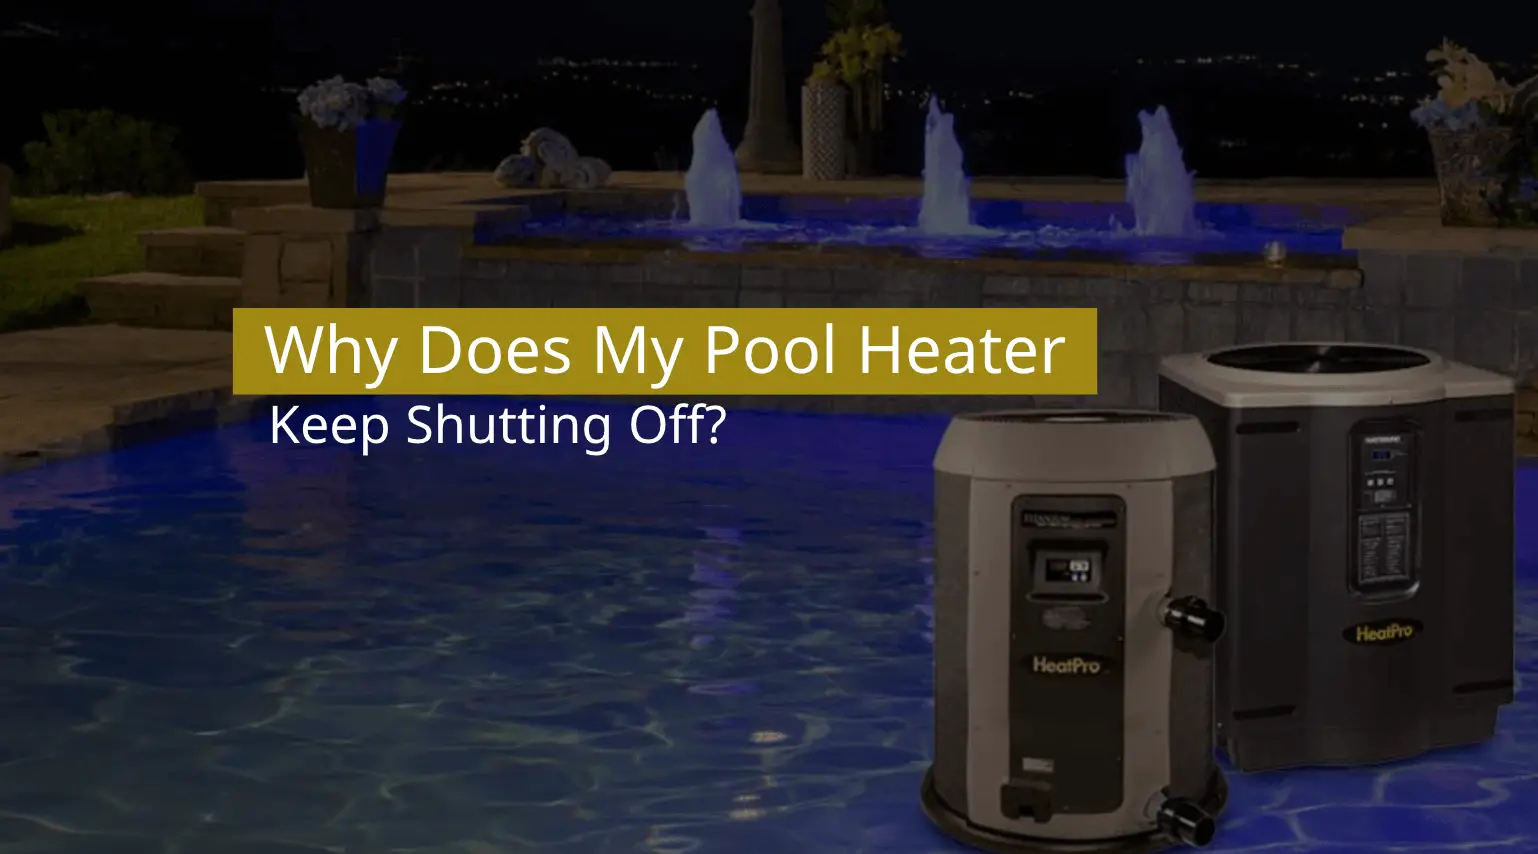 Why Does My Pool Heater Keep Shutting Off?